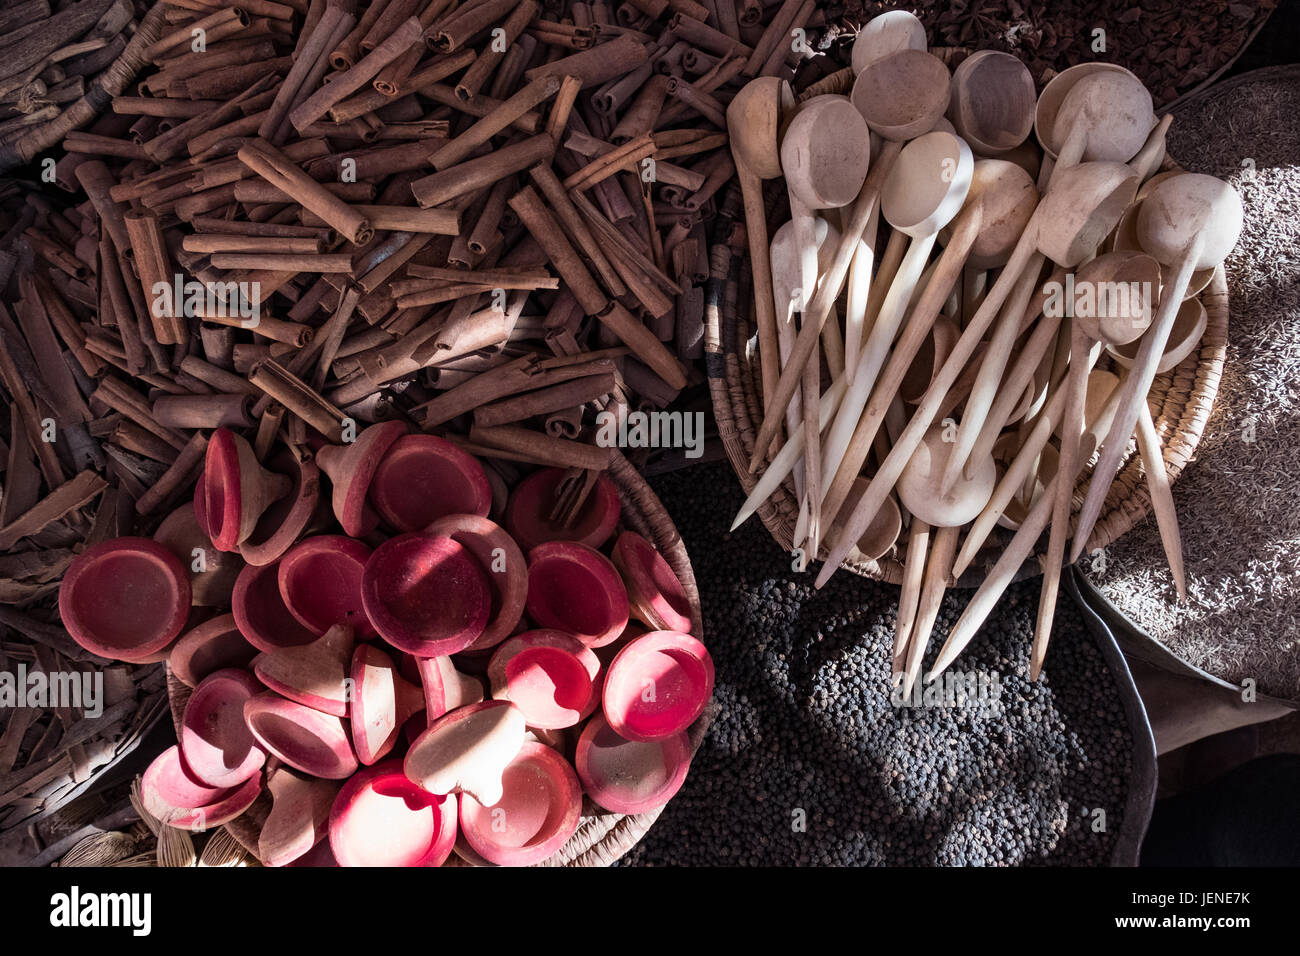 Spices and cooking utensils in a market, Morocco Stock Photo